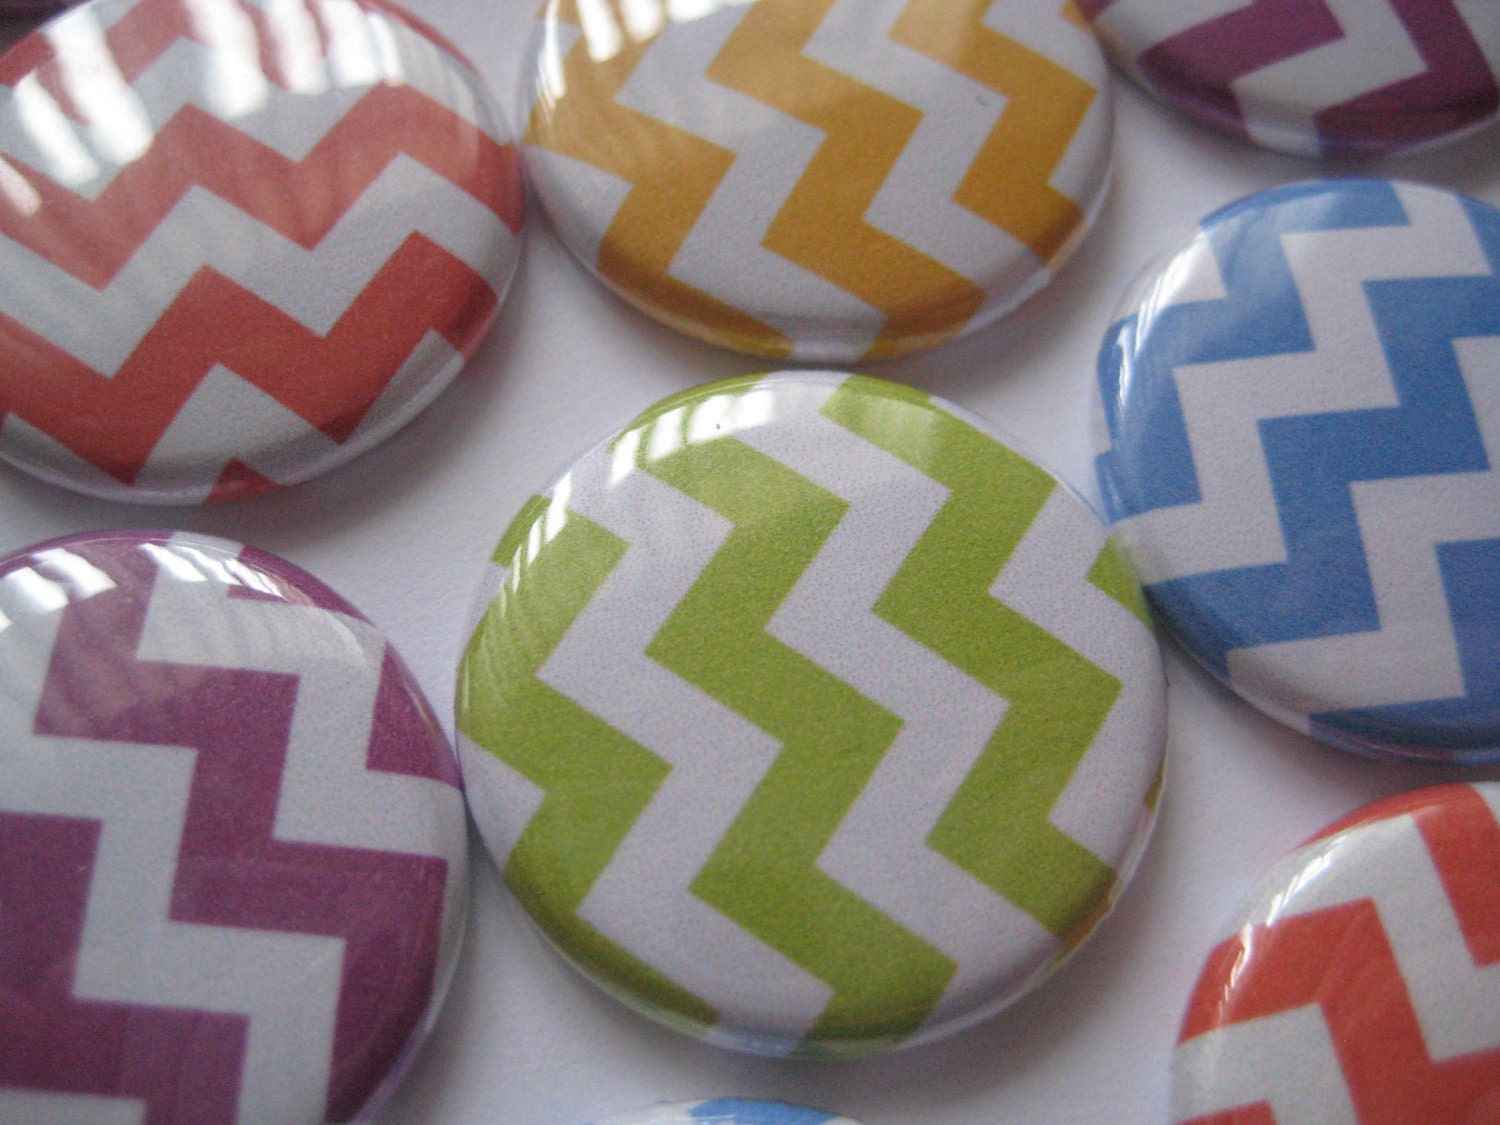 15 Colorful  Chevron Images 1" flat back buttons - PaperCandys